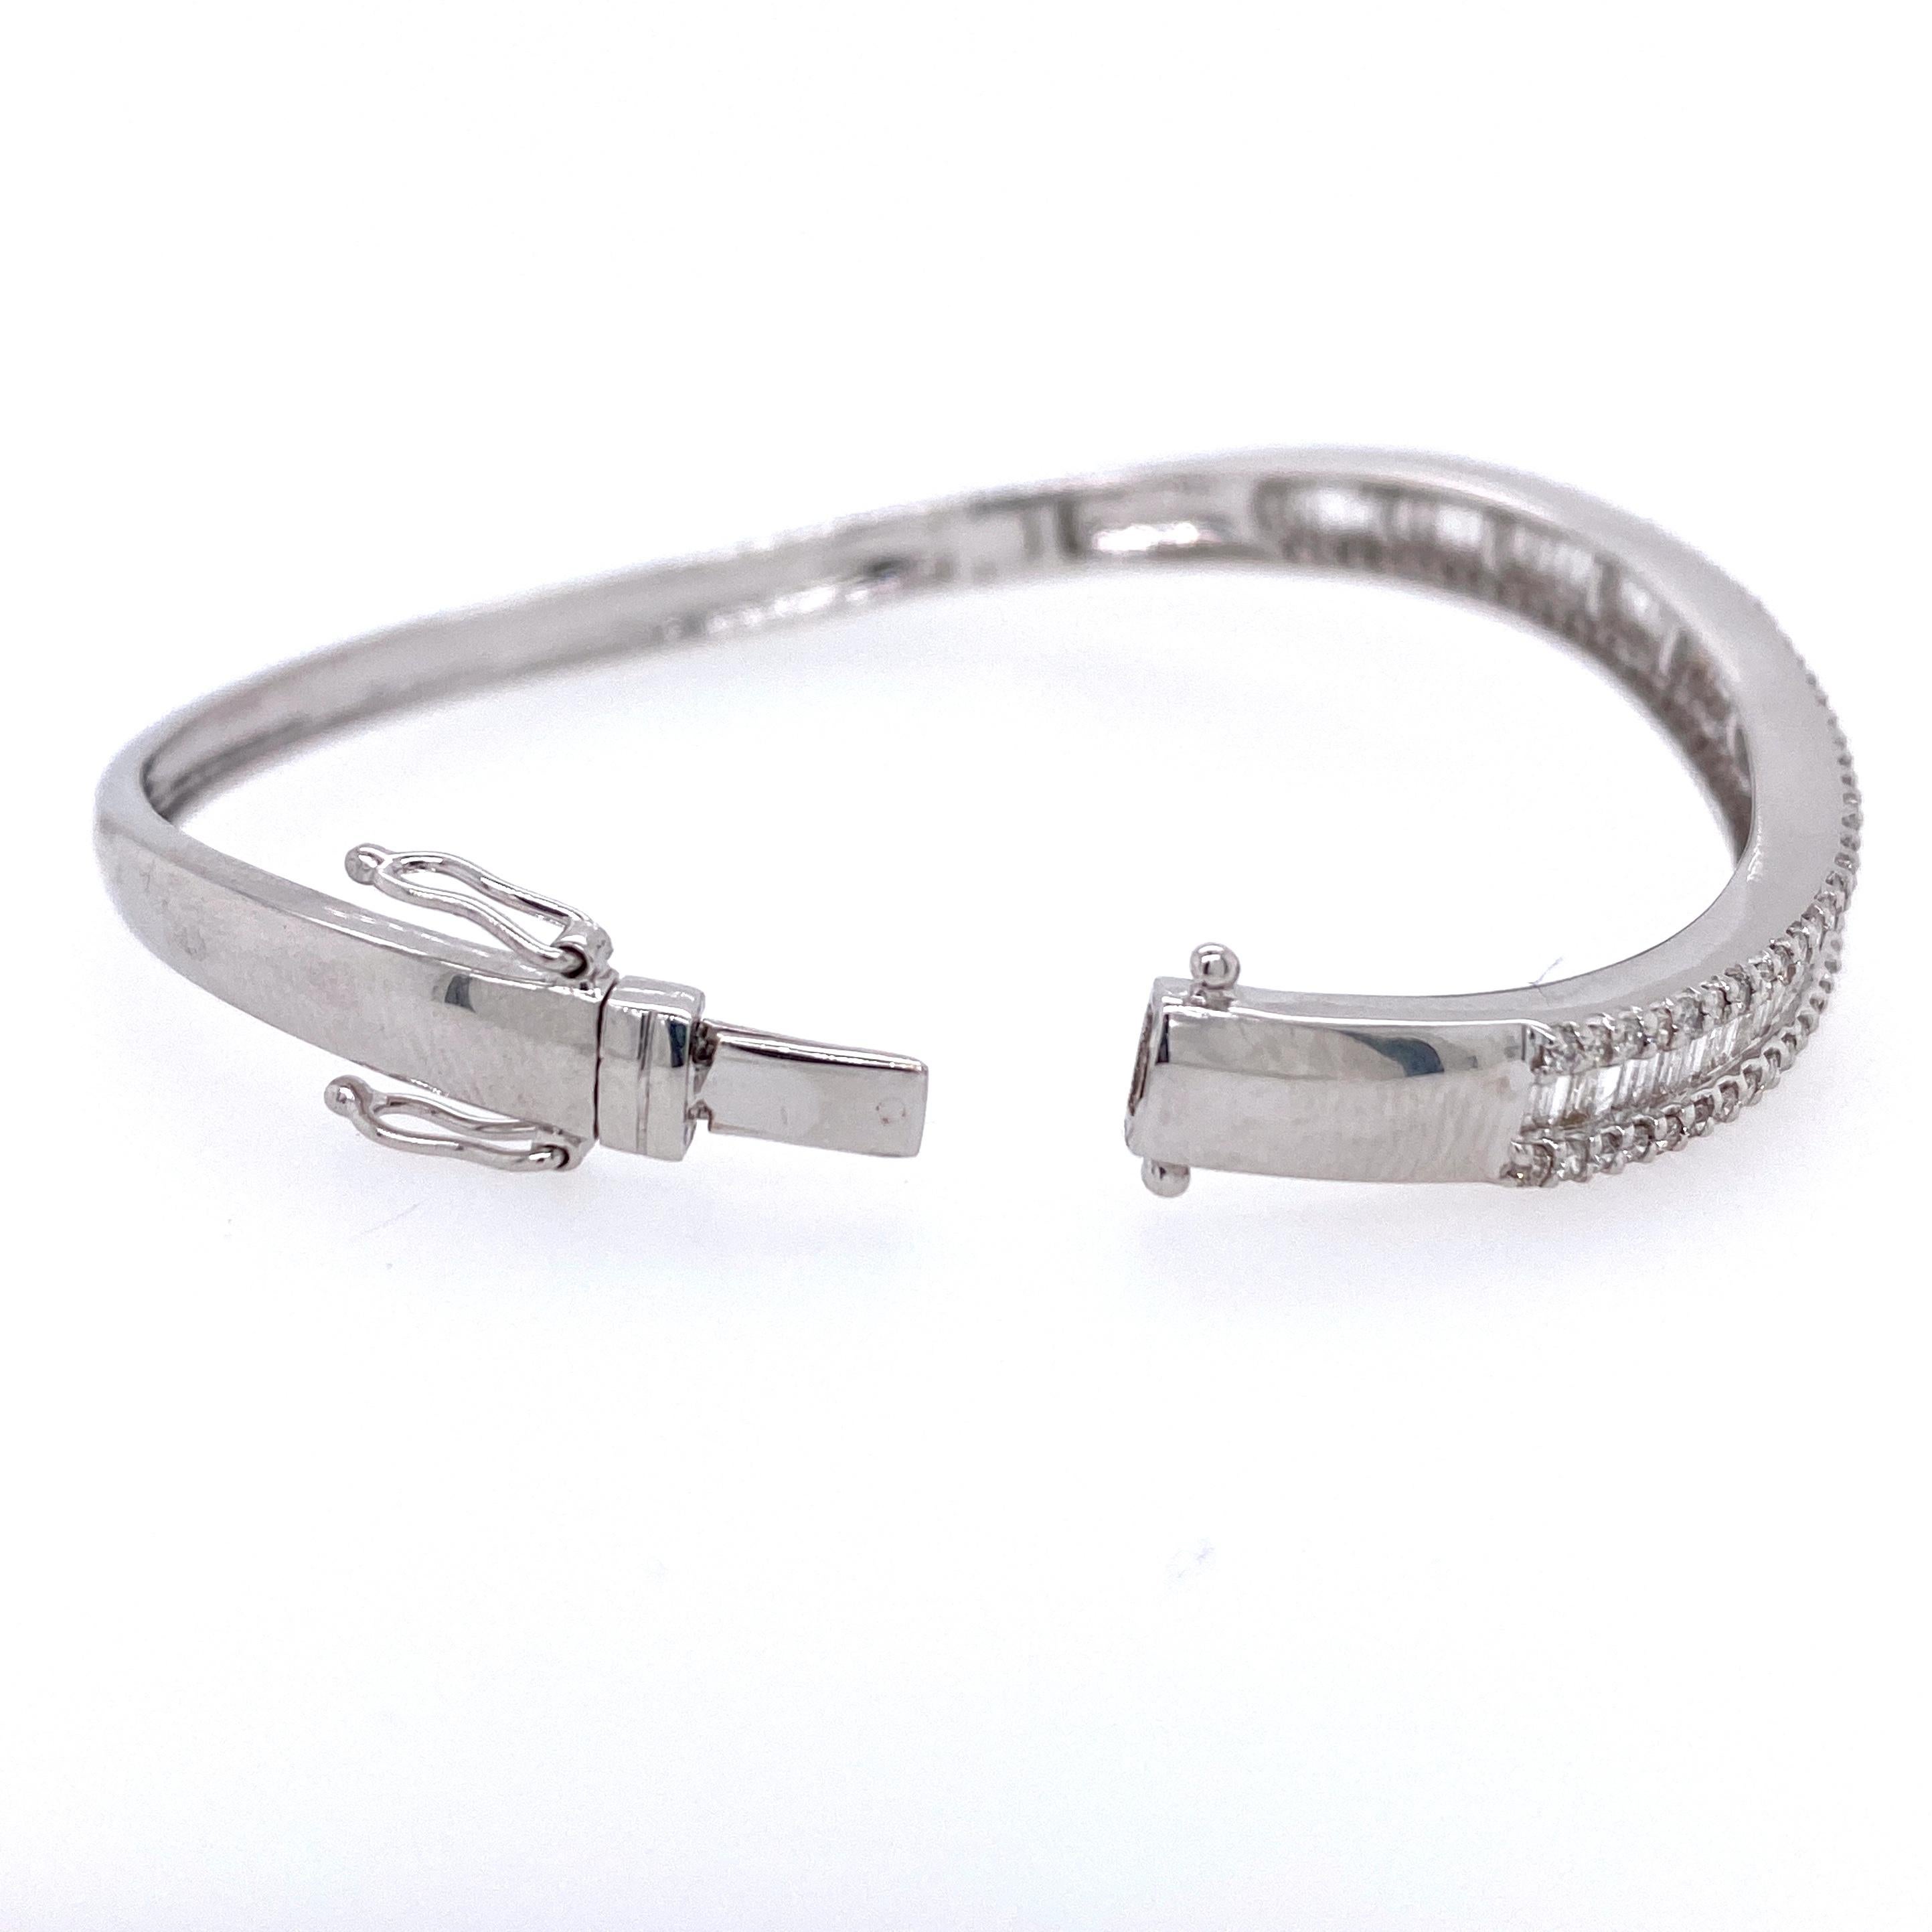 One 14 karat white gold (stamped 14K) bangle bracelet set with fifty-nine straight baguette diamonds and eighty-two round brilliant diamonds, approximately 3.00 carats total weight with matching H/I color and I1 clarity.  The top of the bracelet